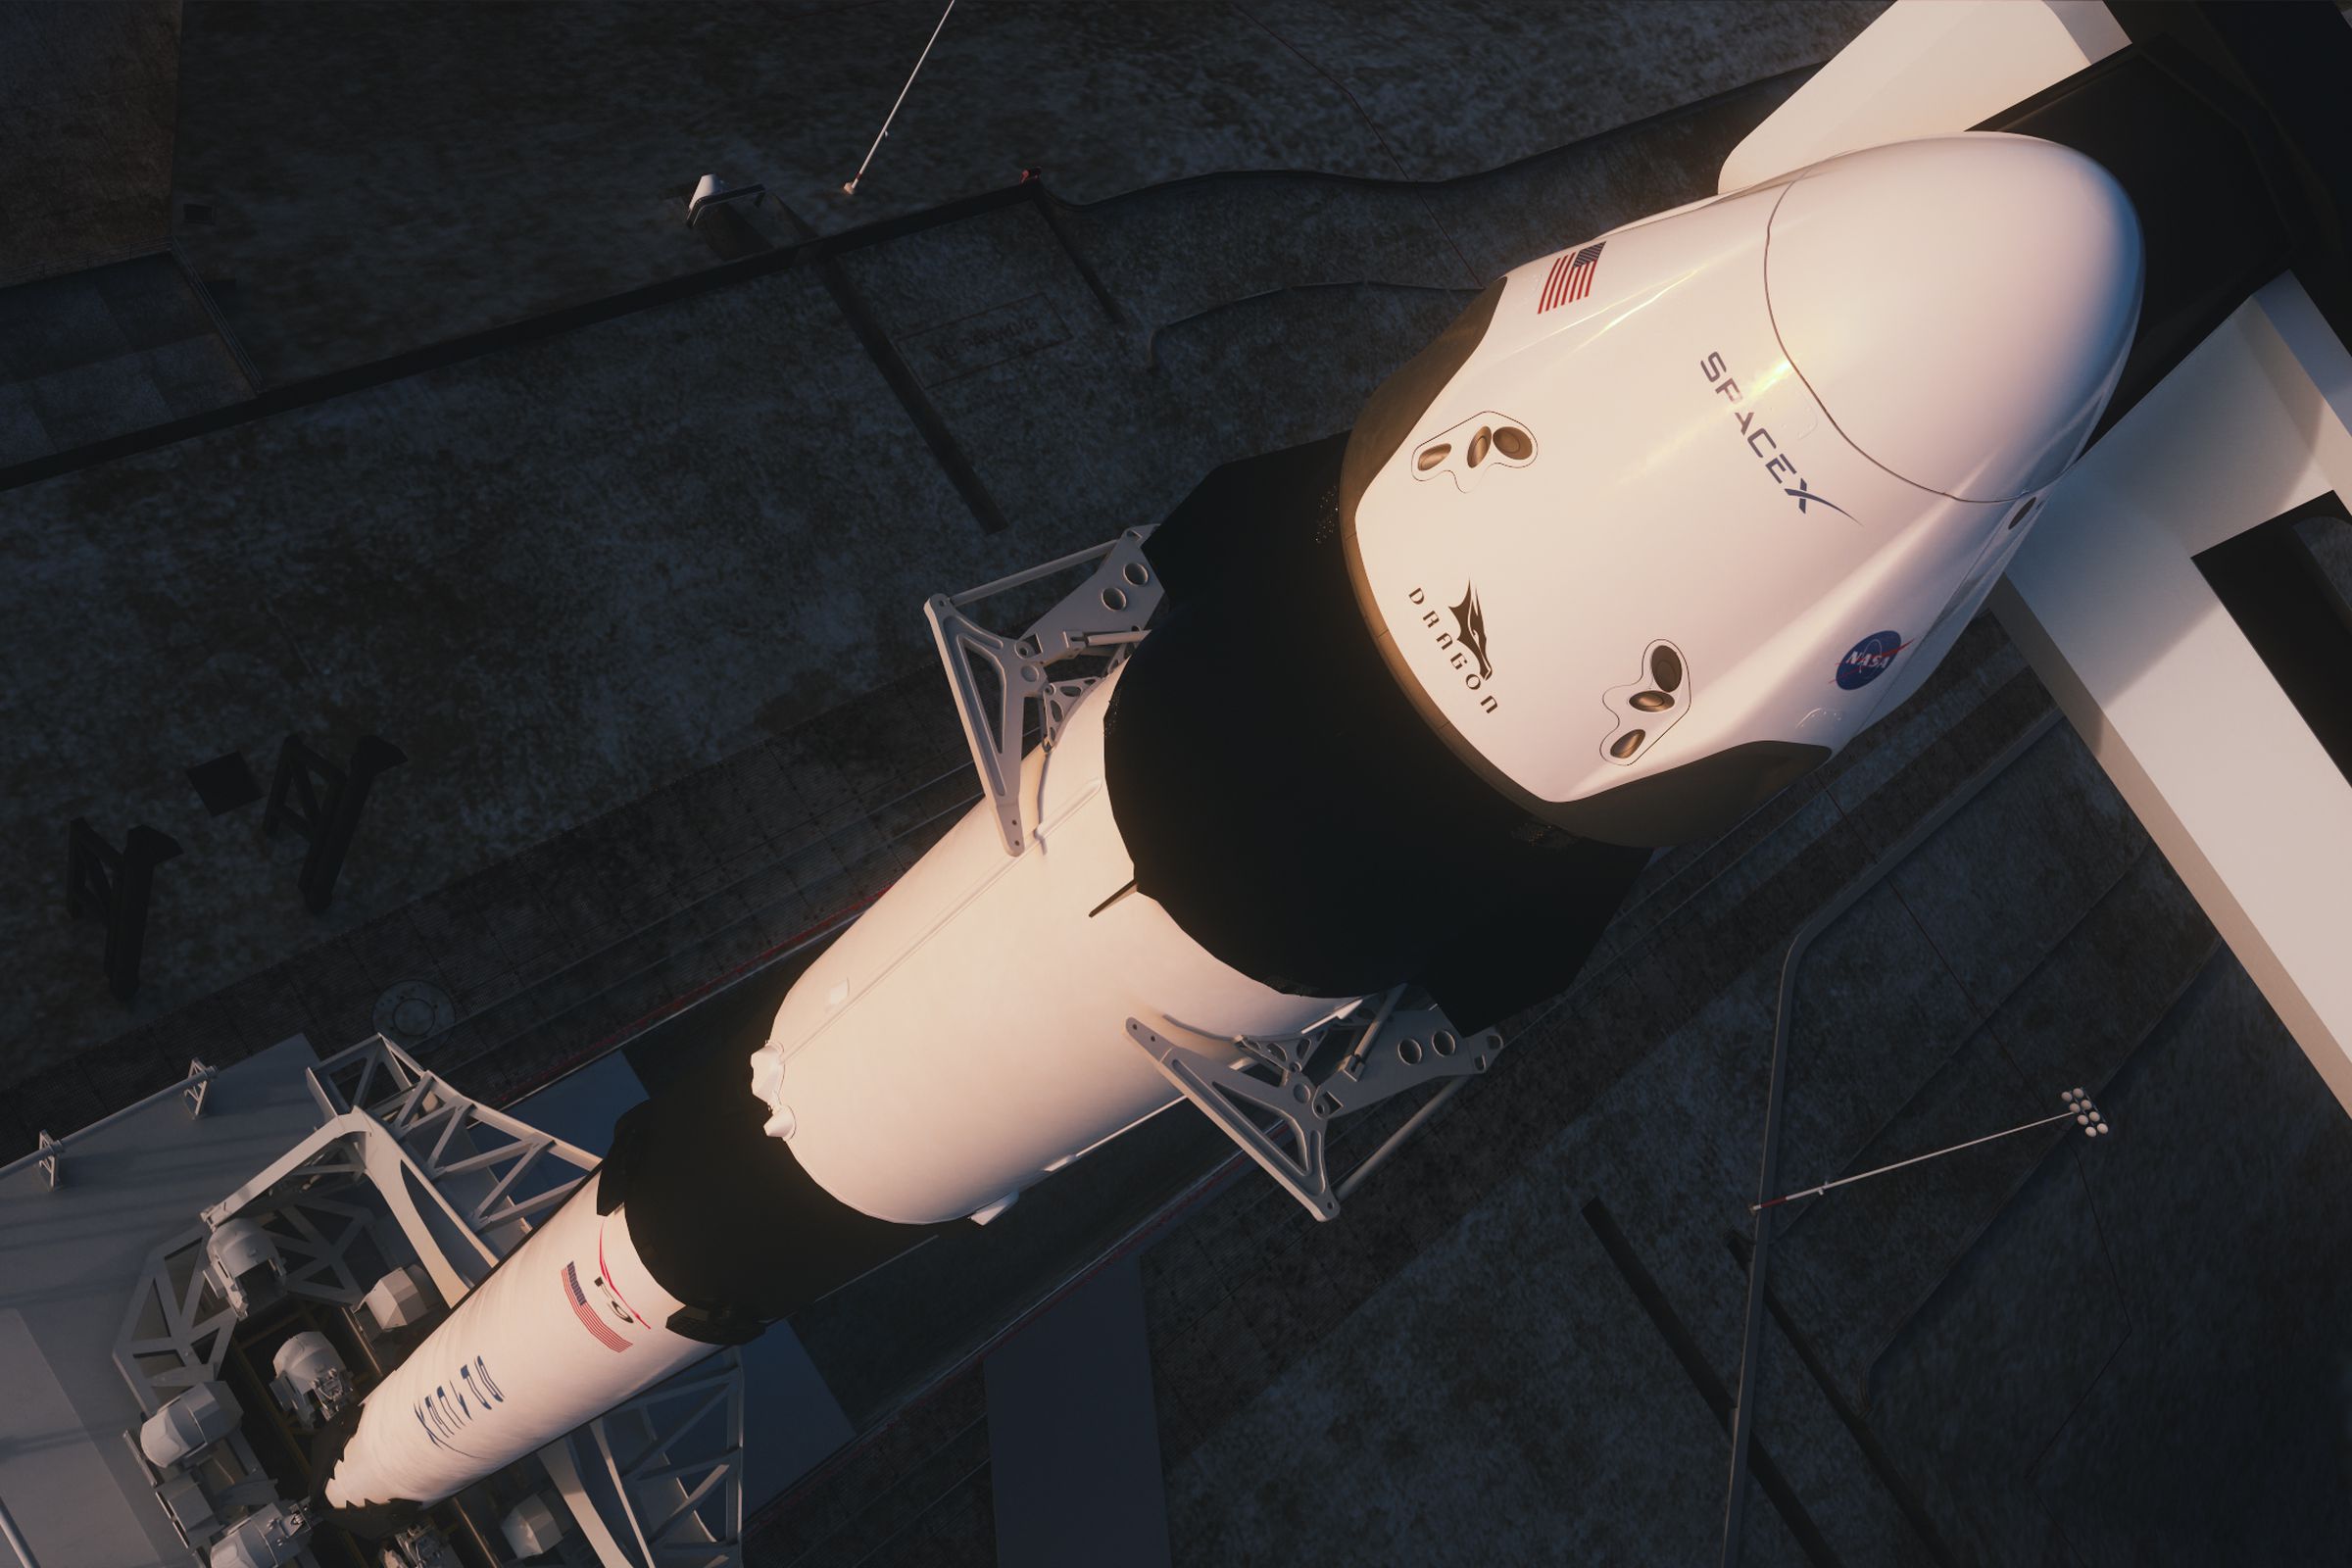 A rendering of SpaceX’s Crew Dragon on top of the Falcon 9 rocket